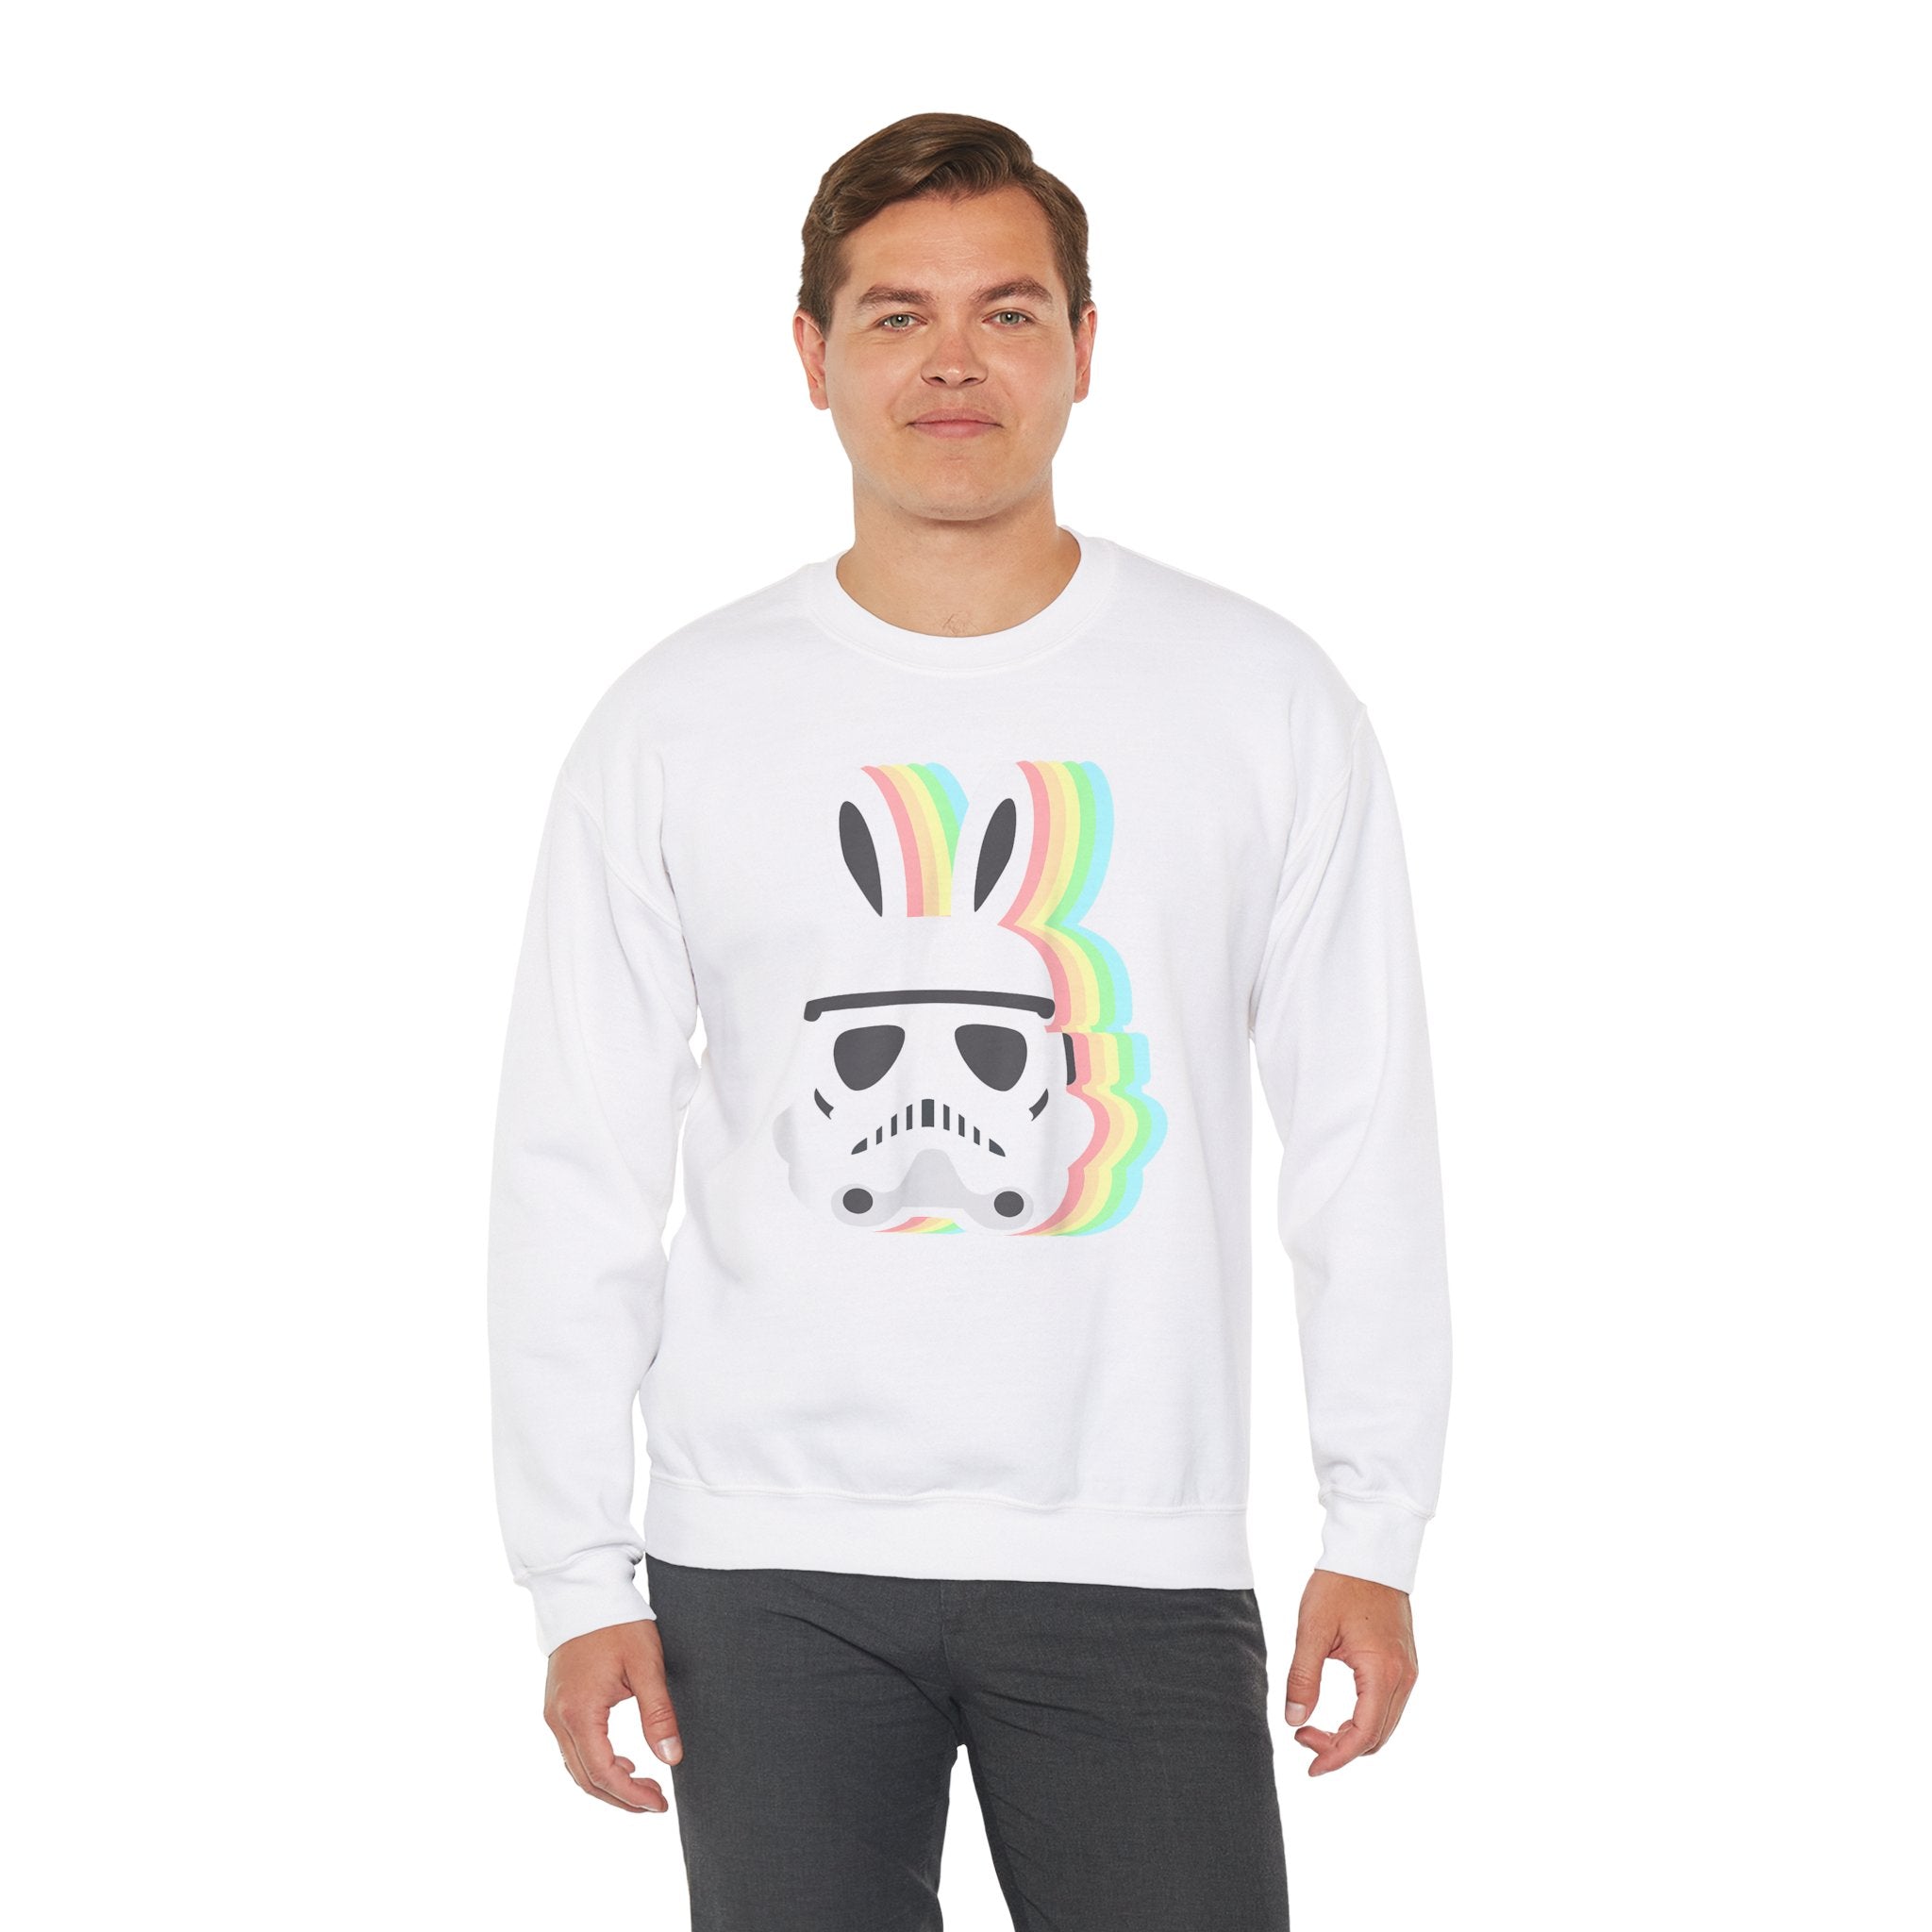 A person in a Star Wars Easter Stormtrooper - Sweatshirt featuring an Easter Stormtrooper helmet with rainbow colors and bunny ears design on the front.